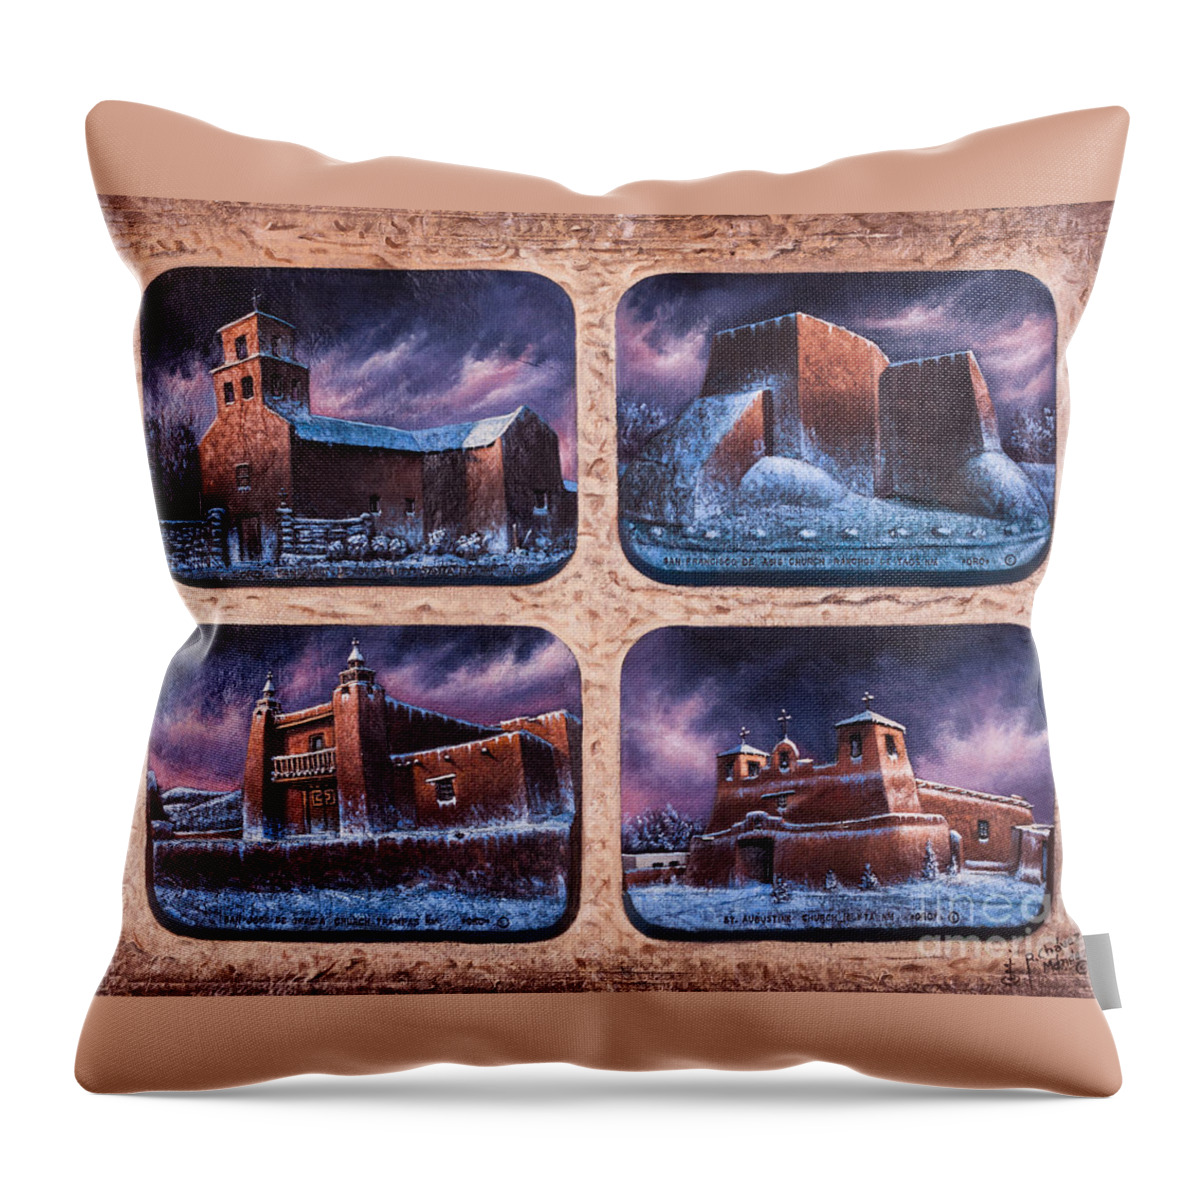 Churches Throw Pillow featuring the mixed media New Mexico Churches in Snow by Ricardo Chavez-Mendez